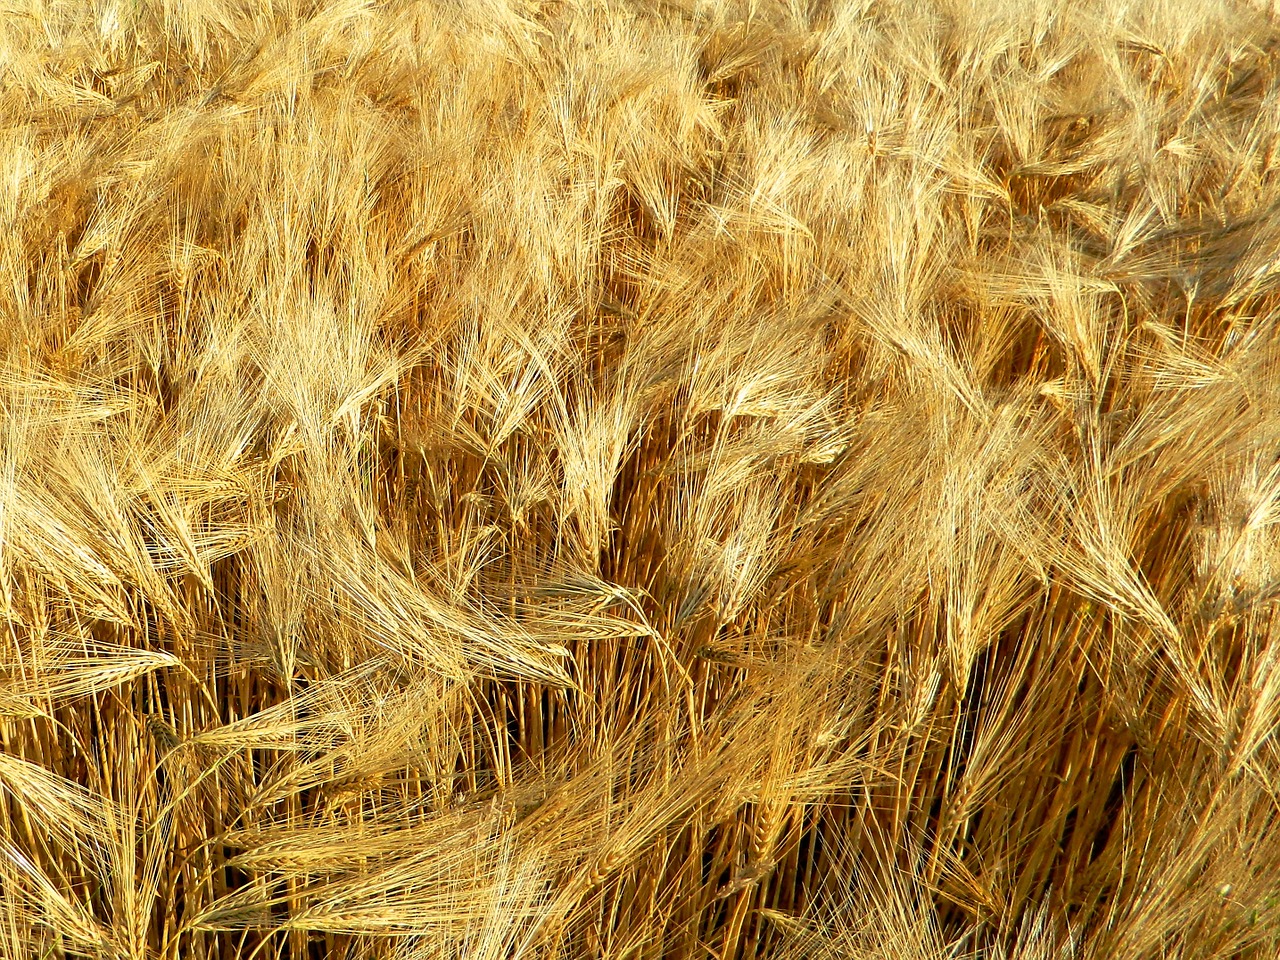 Wheat,kolos,grain,agriculture,nature - free image from needpix.com